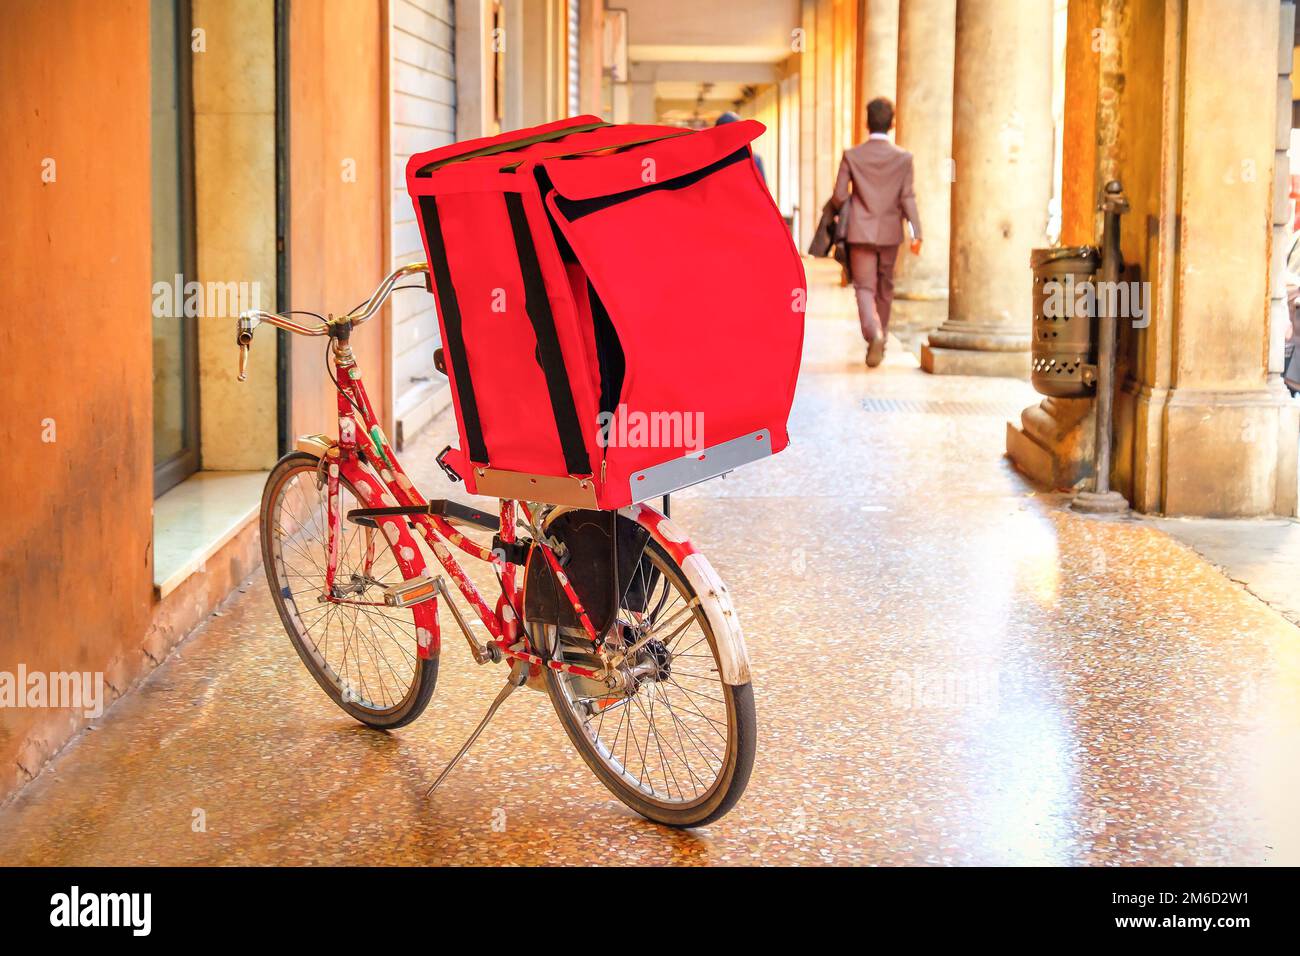 Bicycle delivery red box bike Stock Photo